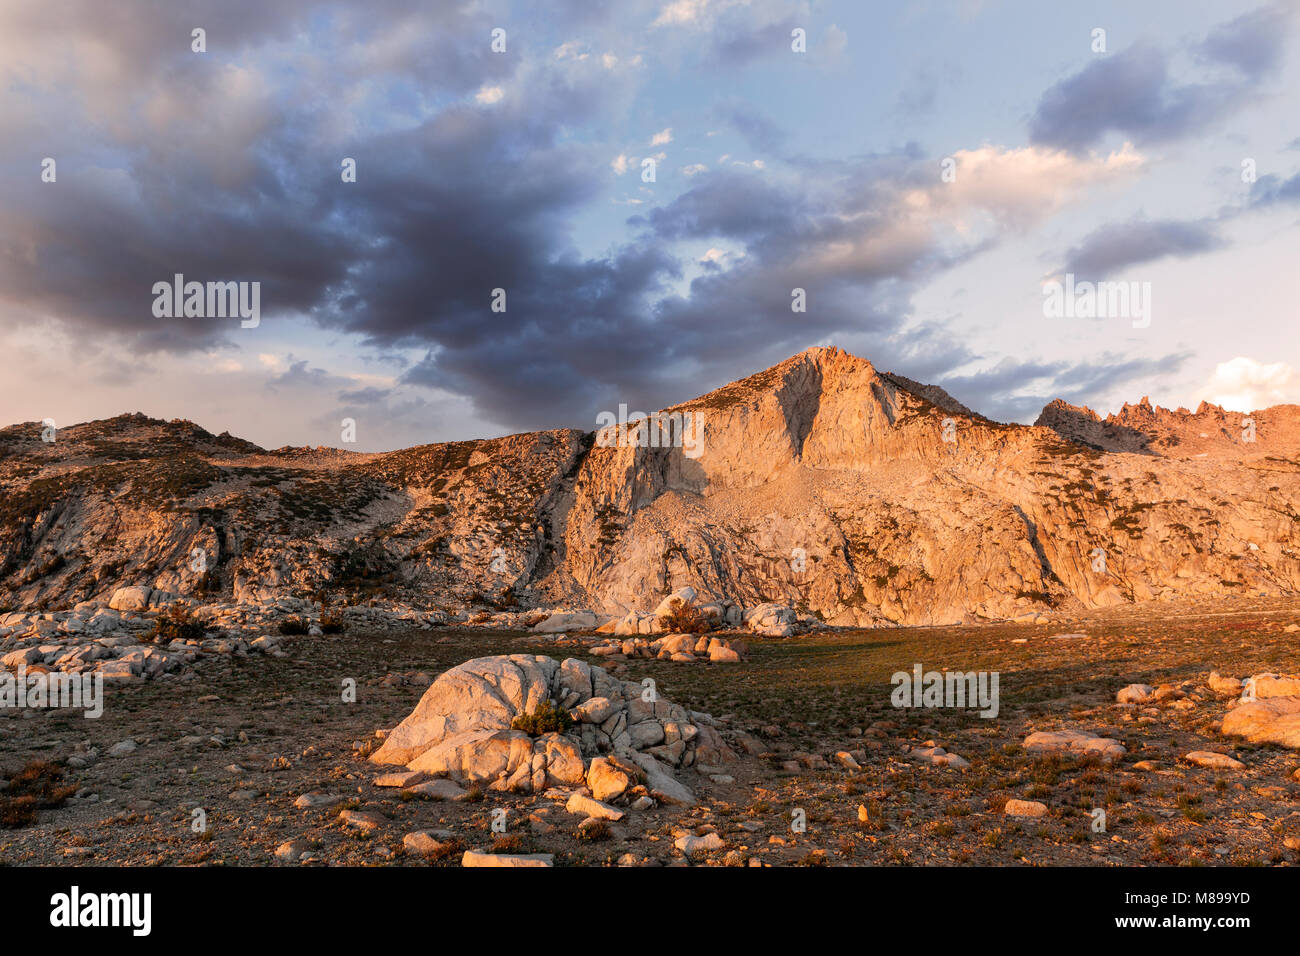 CA03295-00...CALIFORNIA - Sunset at Silver Pass in the John Muir Wilderness along the John Muir Trail / Pacific Crest Trail. Stock Photo